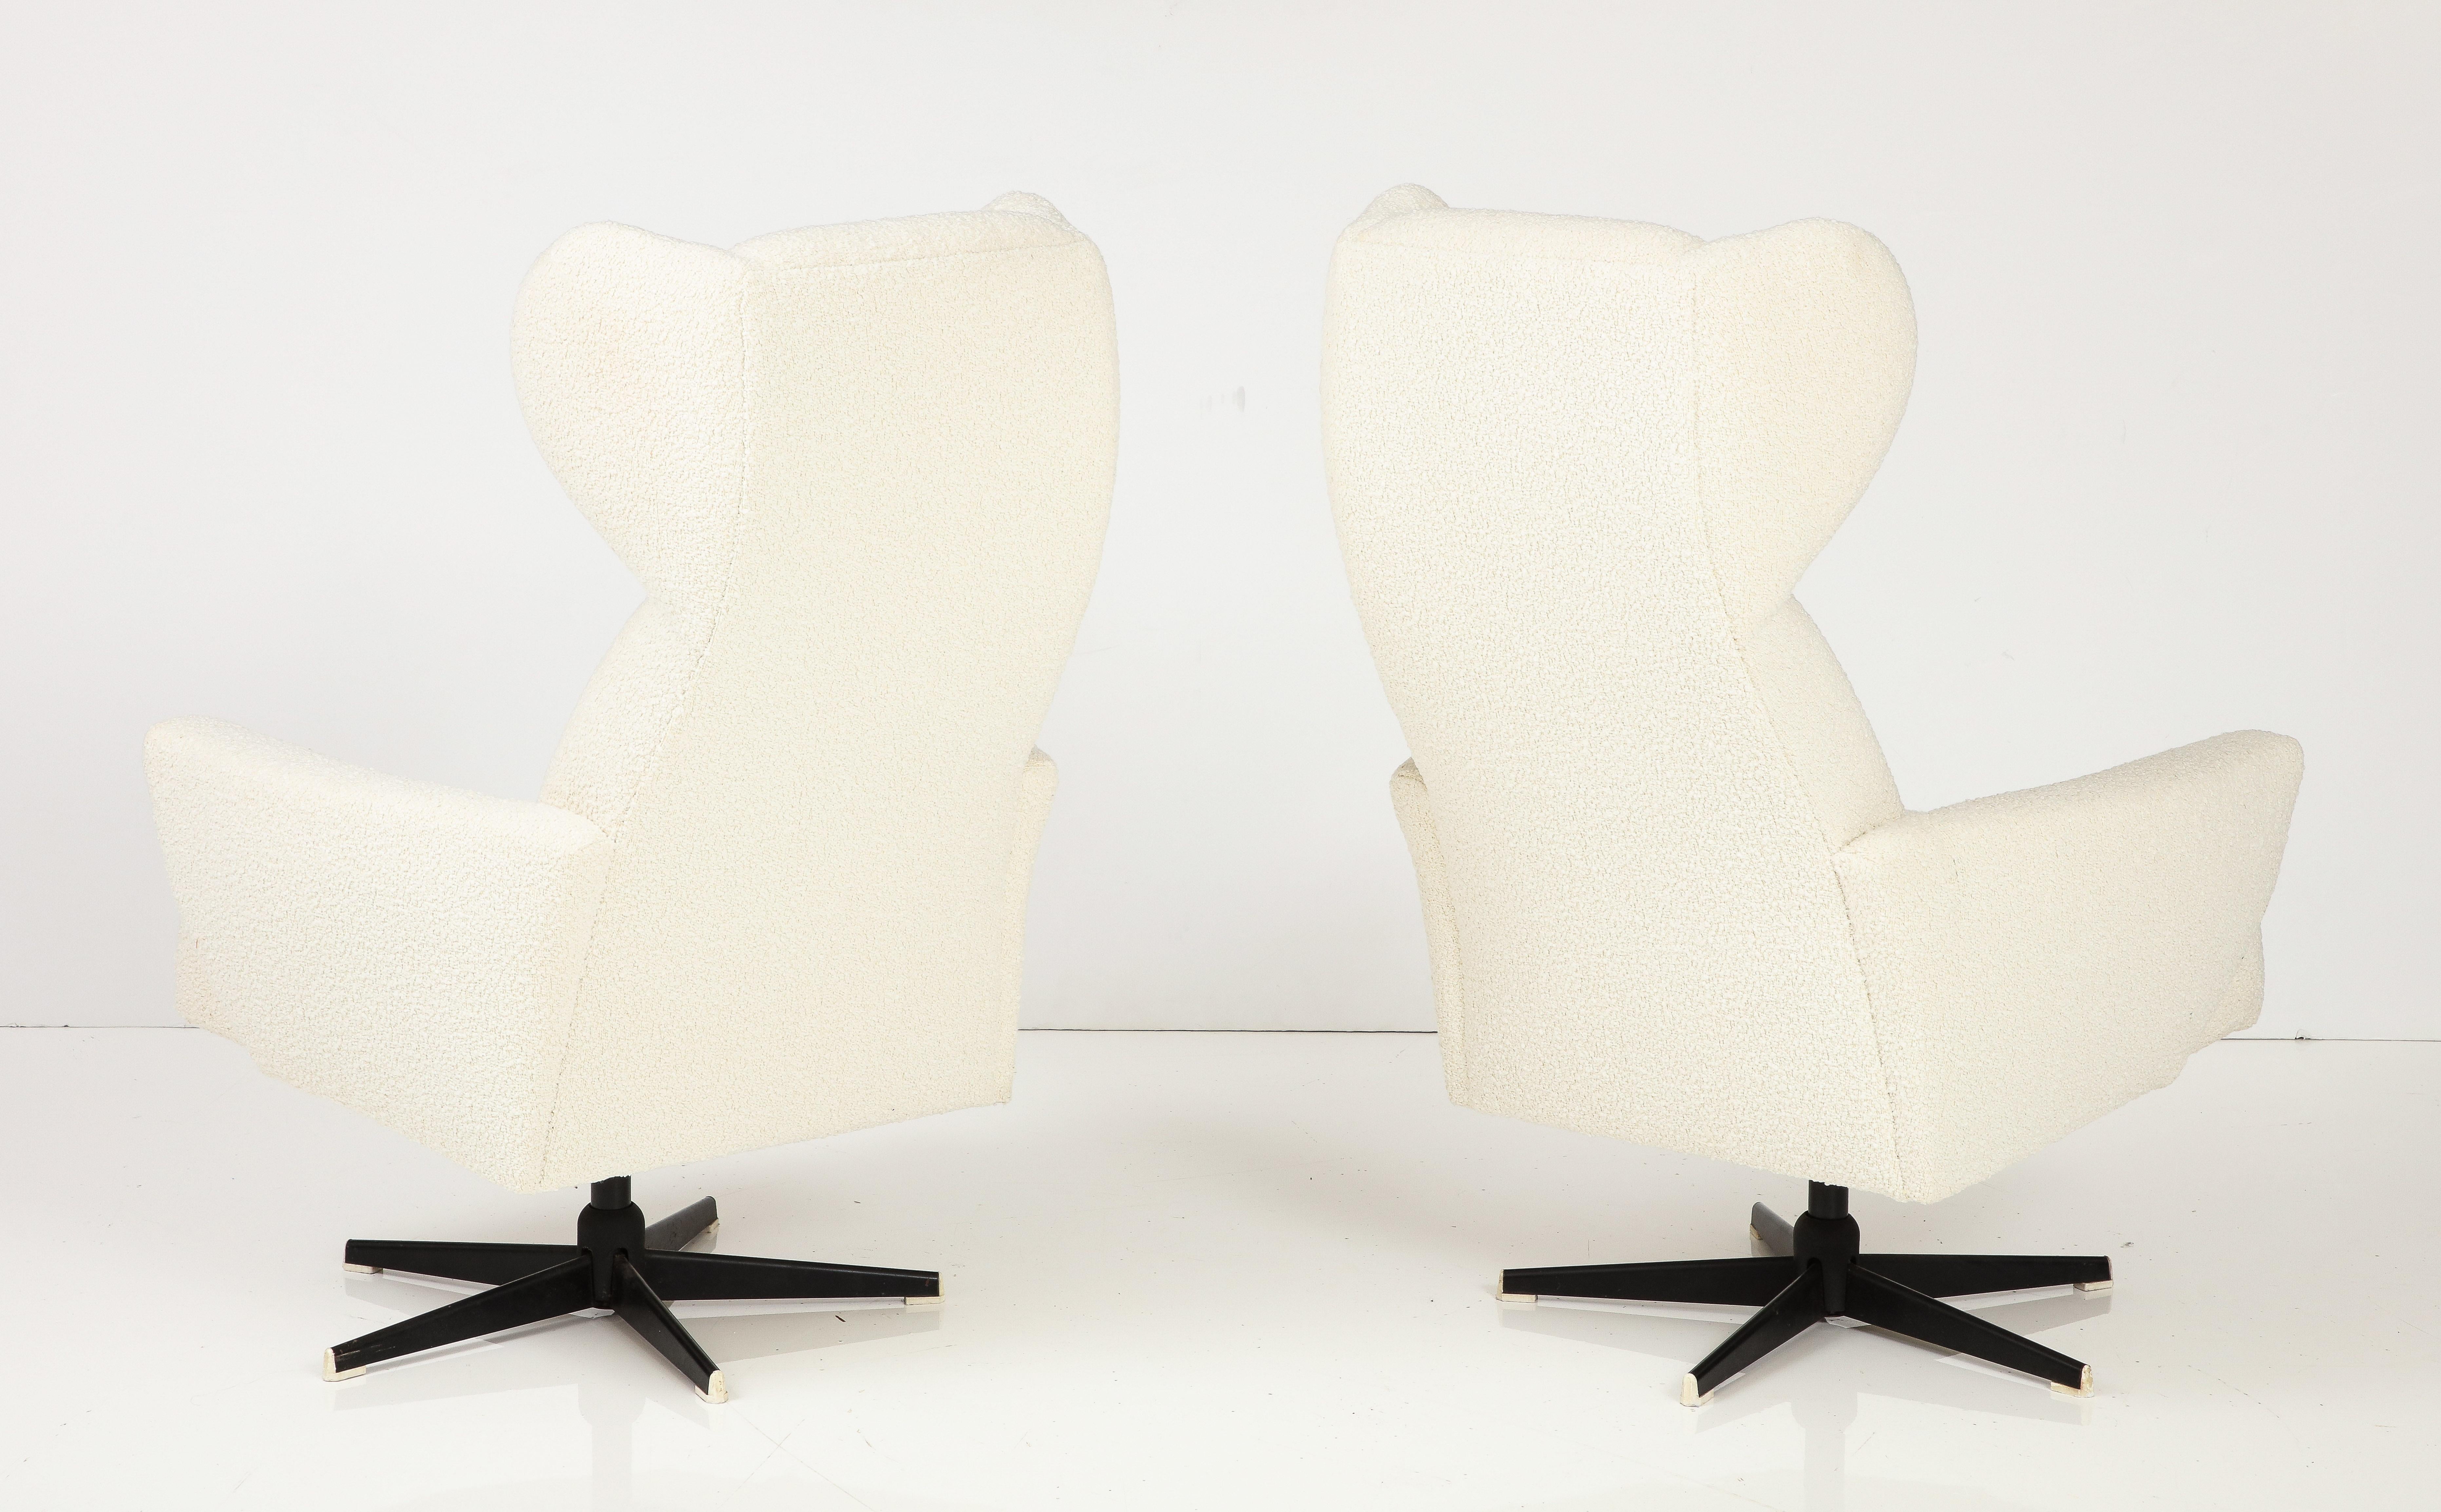 Pair of Italian Modernist High-Back Swivel Chairs, Italy, circa 1960 For Sale 3